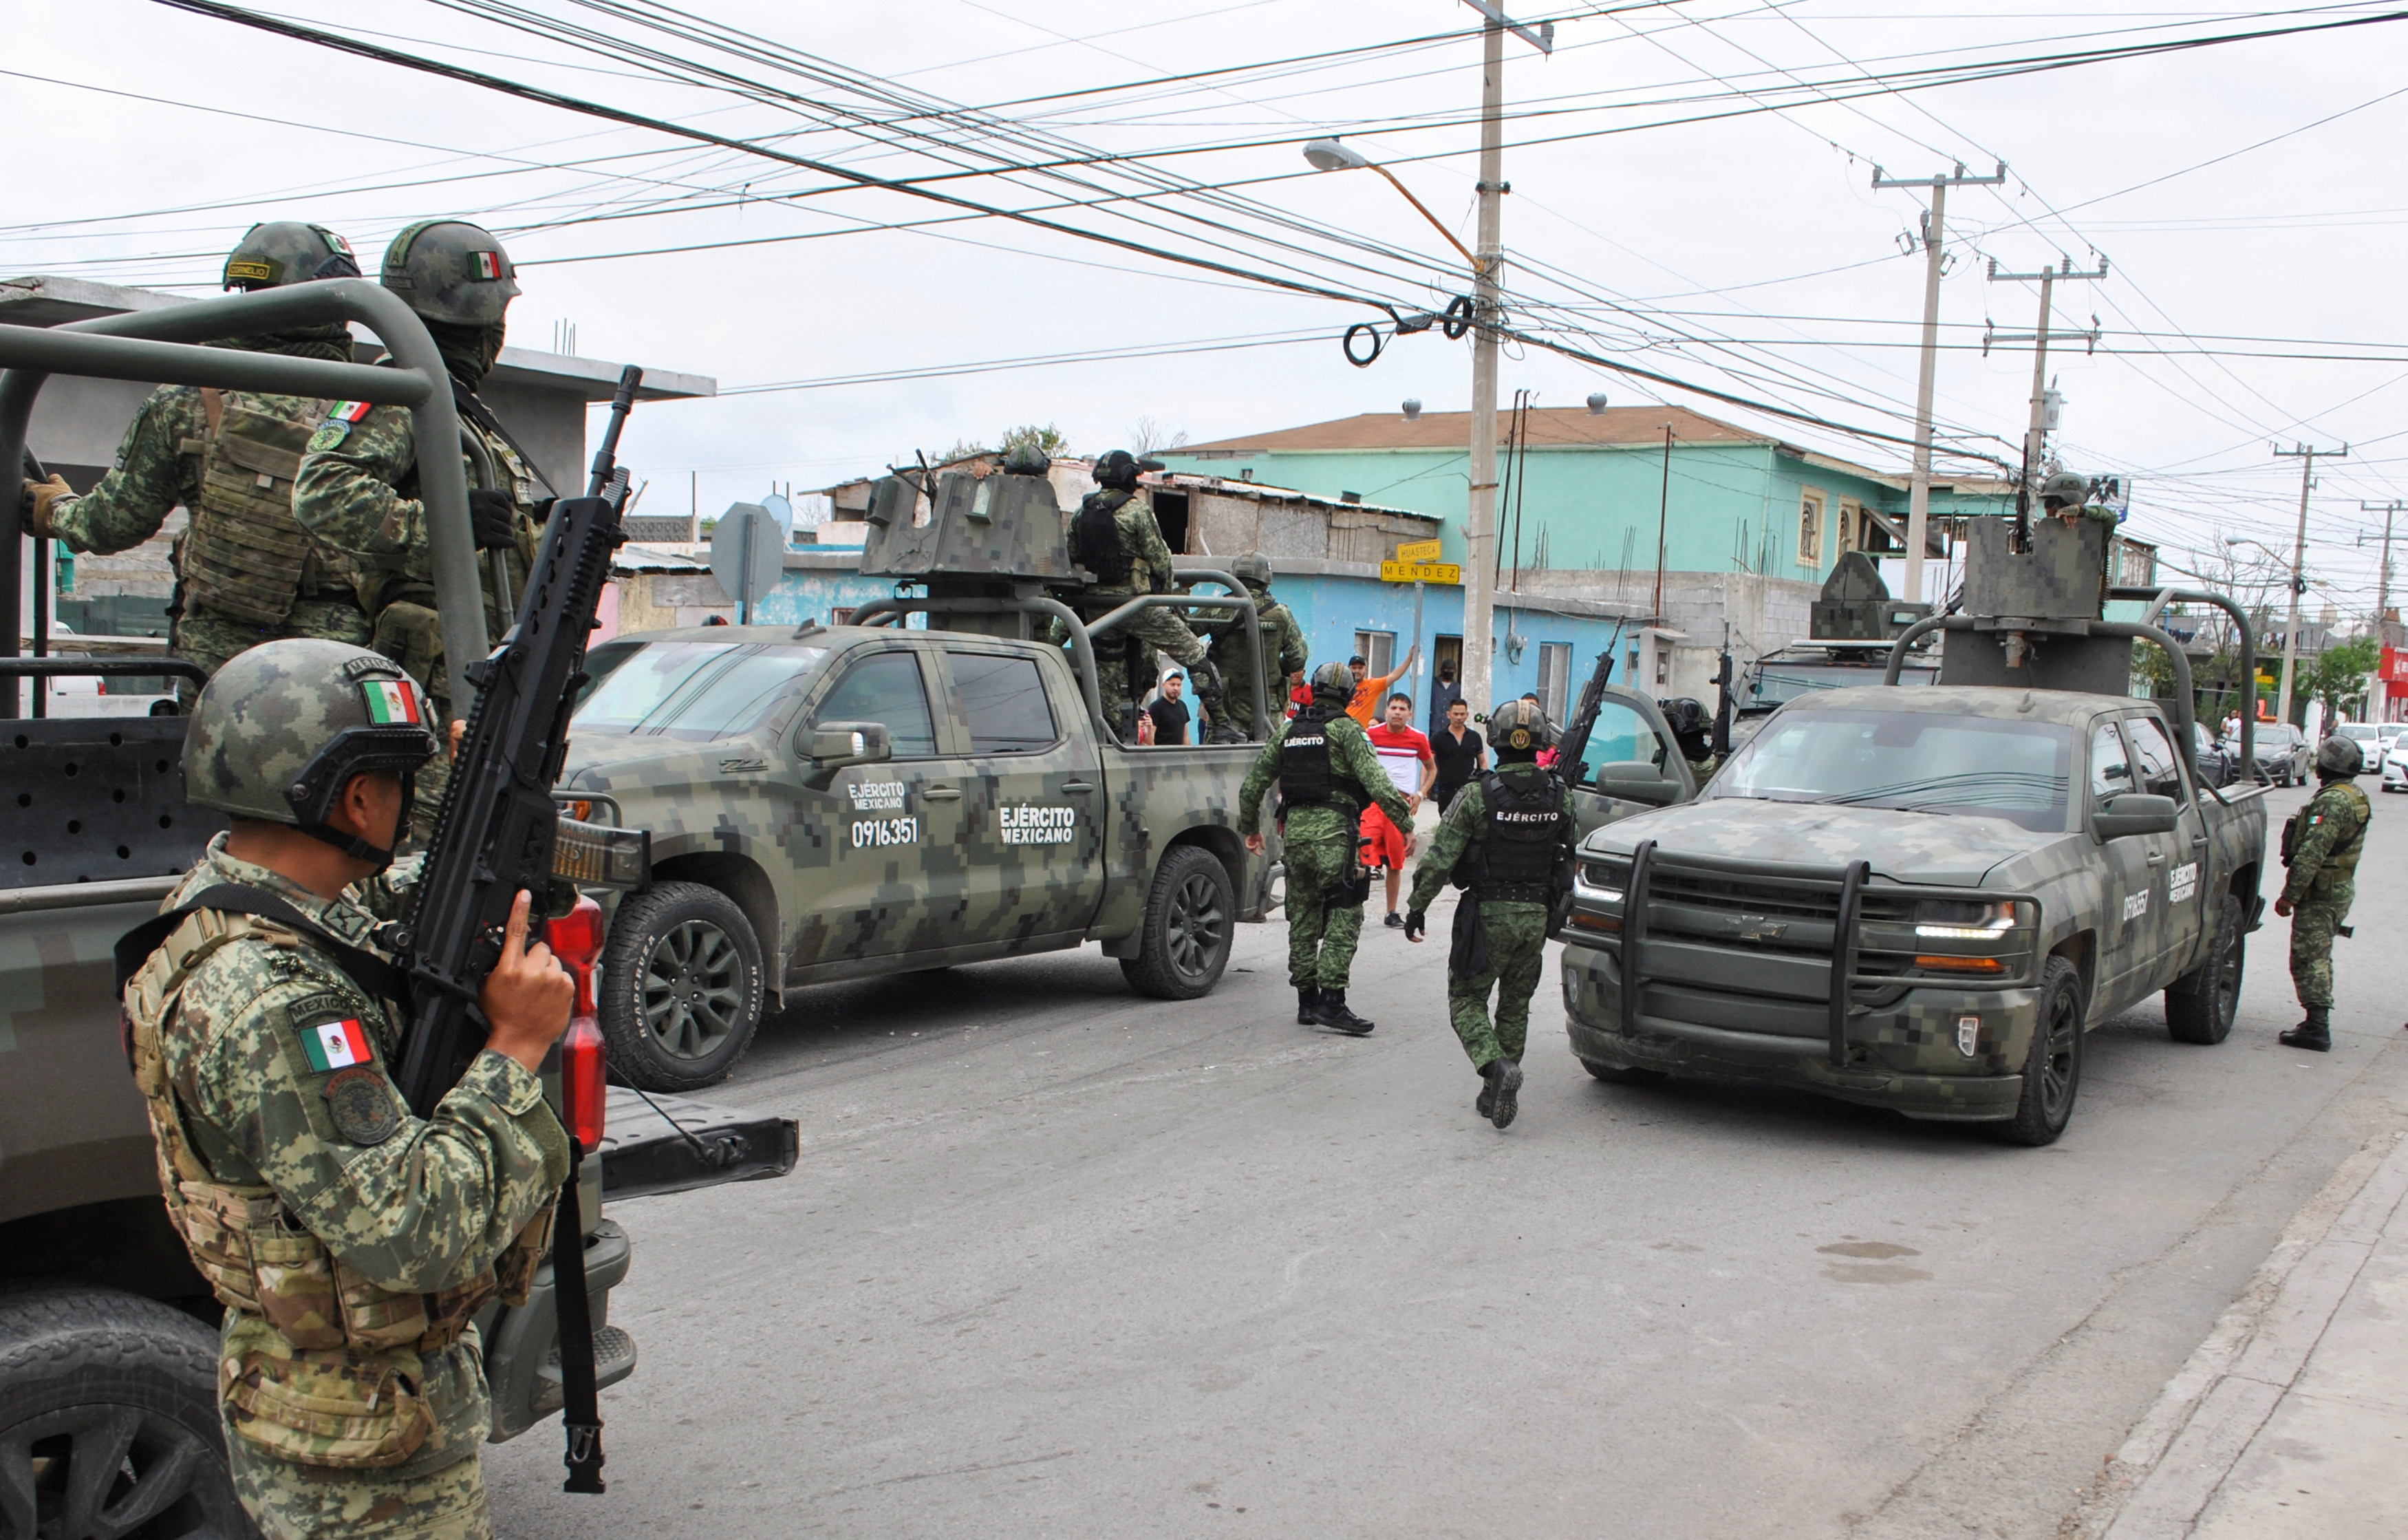 People argue with soldiers near the area where, according to local media, five people were shot dead by Mexican soldiers, in Nuevo Laredo, Mexico February 26, 2023. REUTERS/Jasiel Rubio NO RESALES. NO ARCHIVES